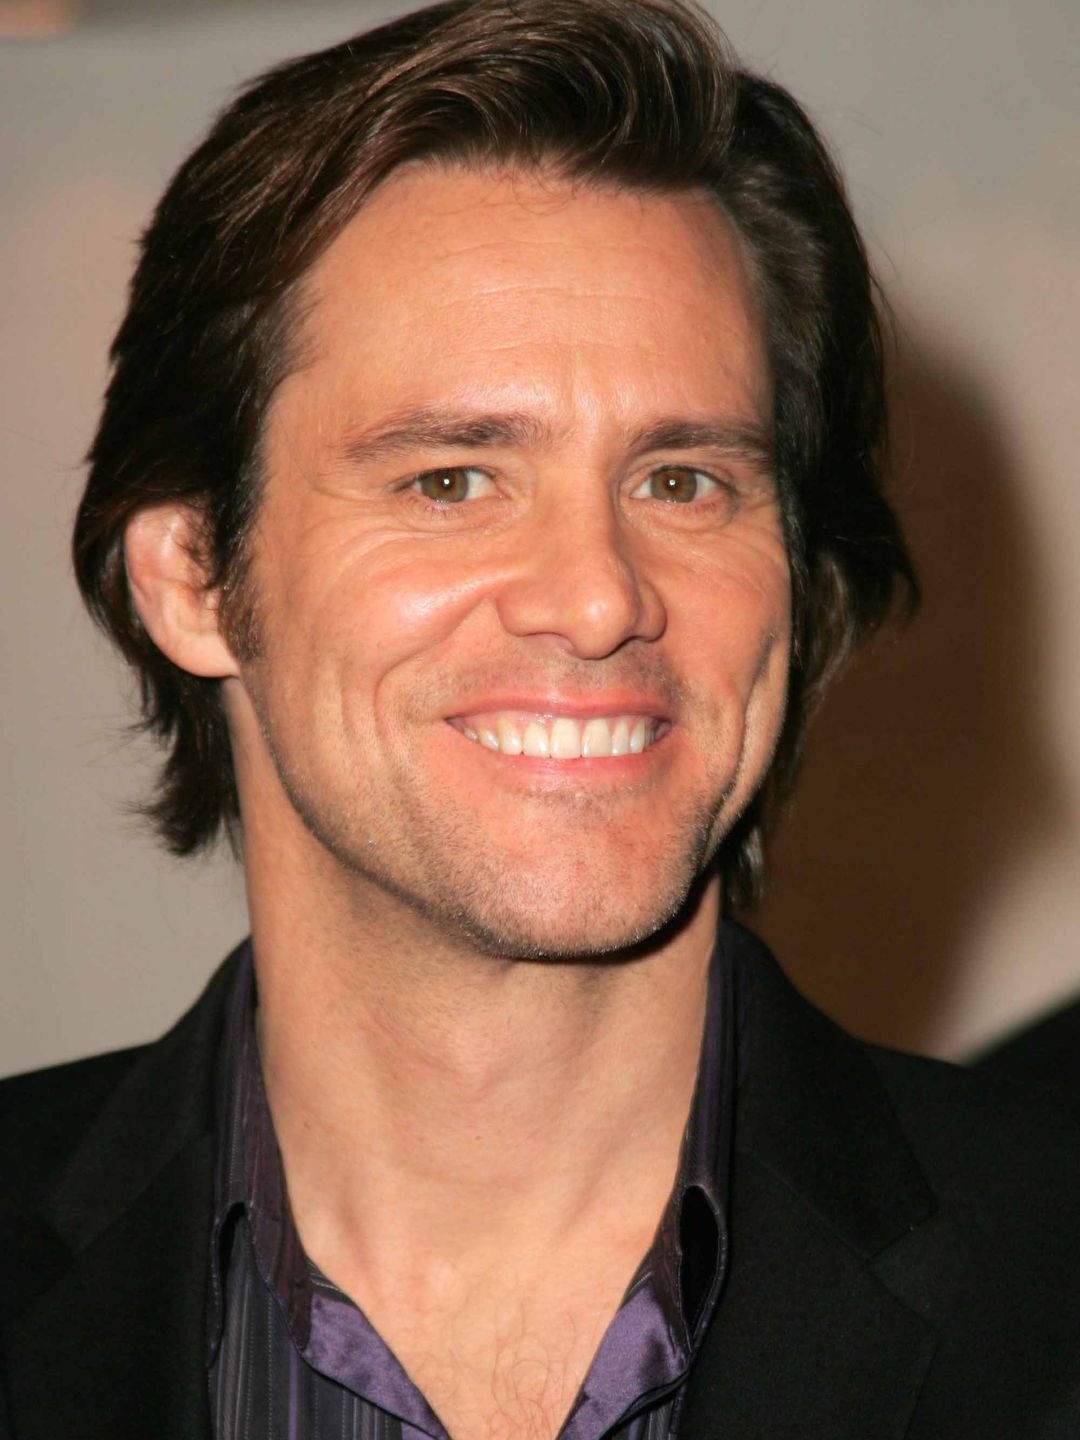 Jim Carrey who is his father